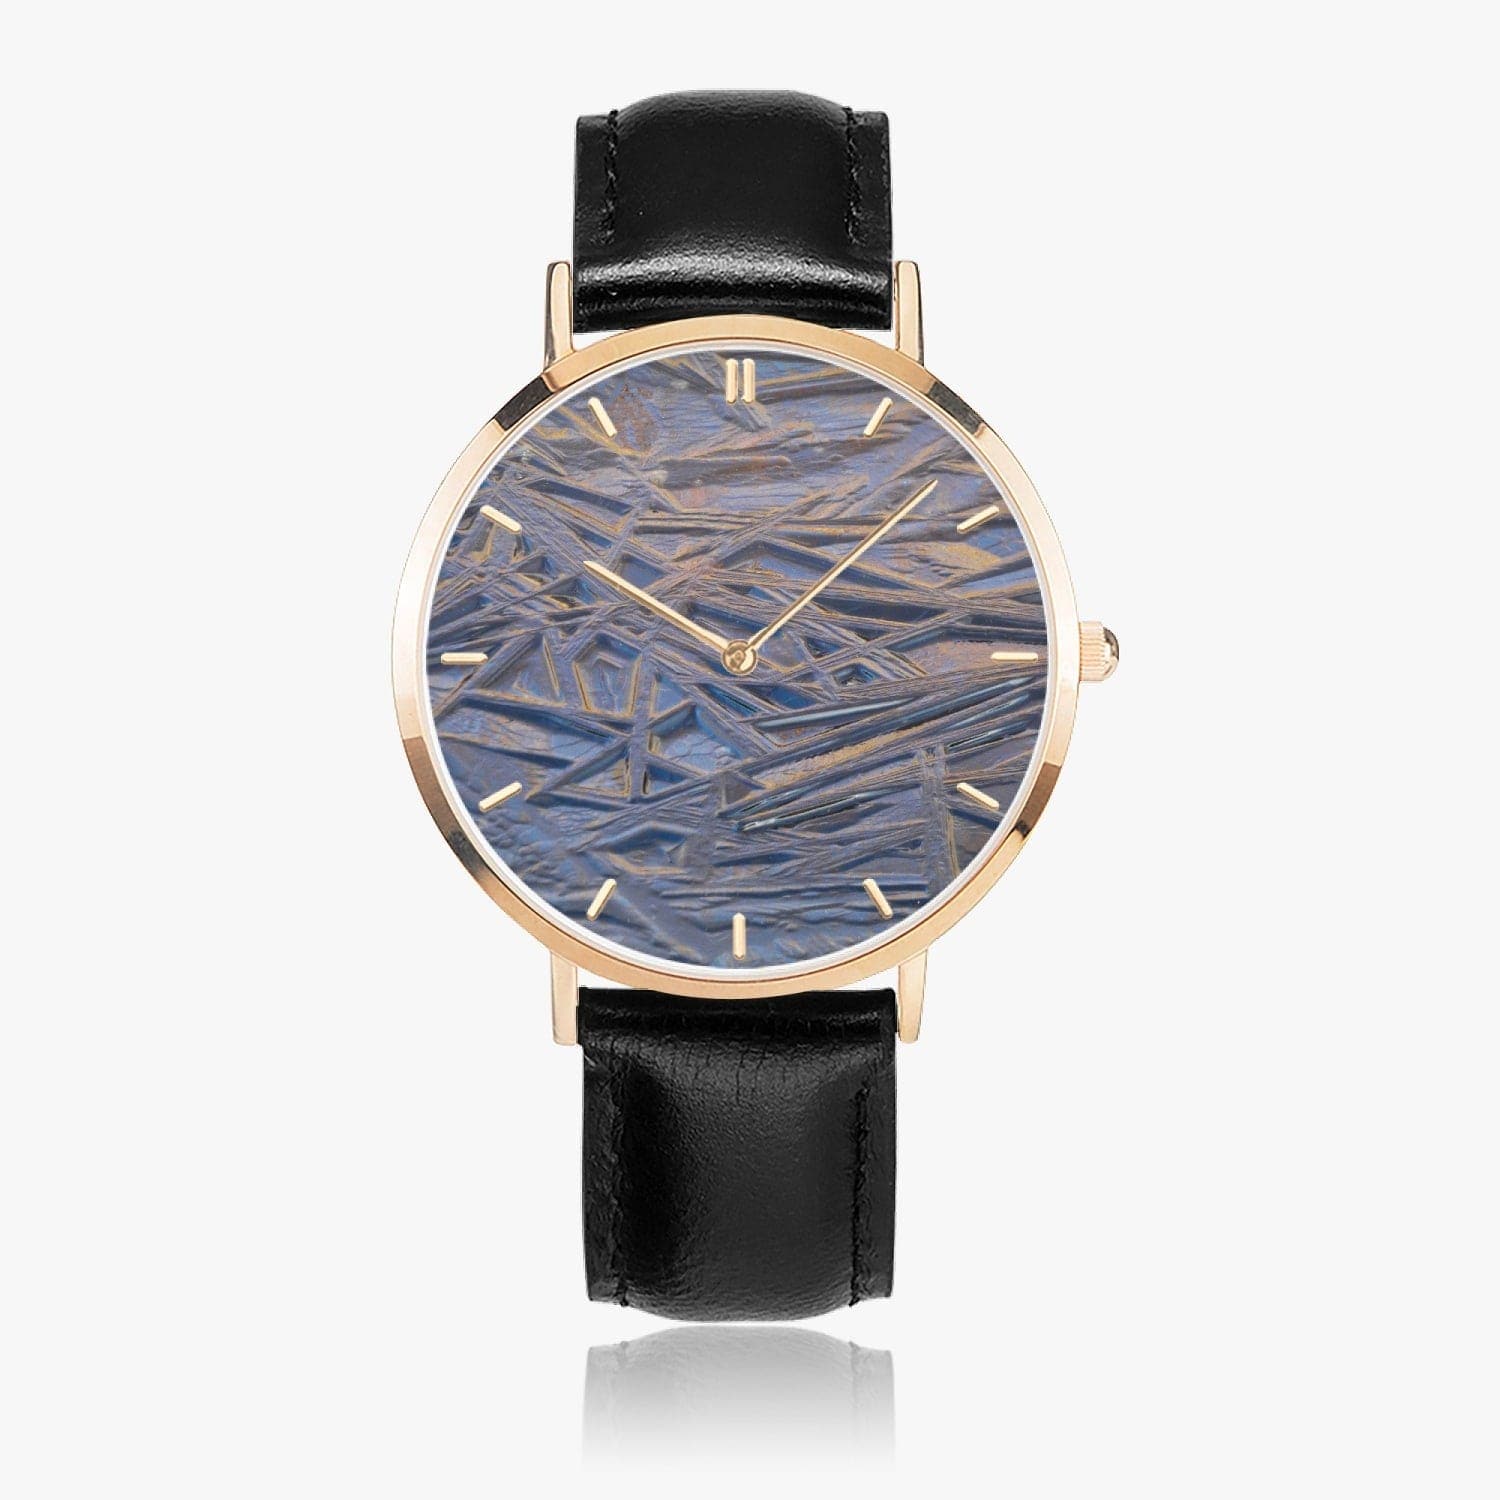 Frozen Time_2. Hot Selling Ultra-Thin Leather Strap Quartz Watch (Rose Gold With Indicators.  Designer watch by Ingrid Hütten